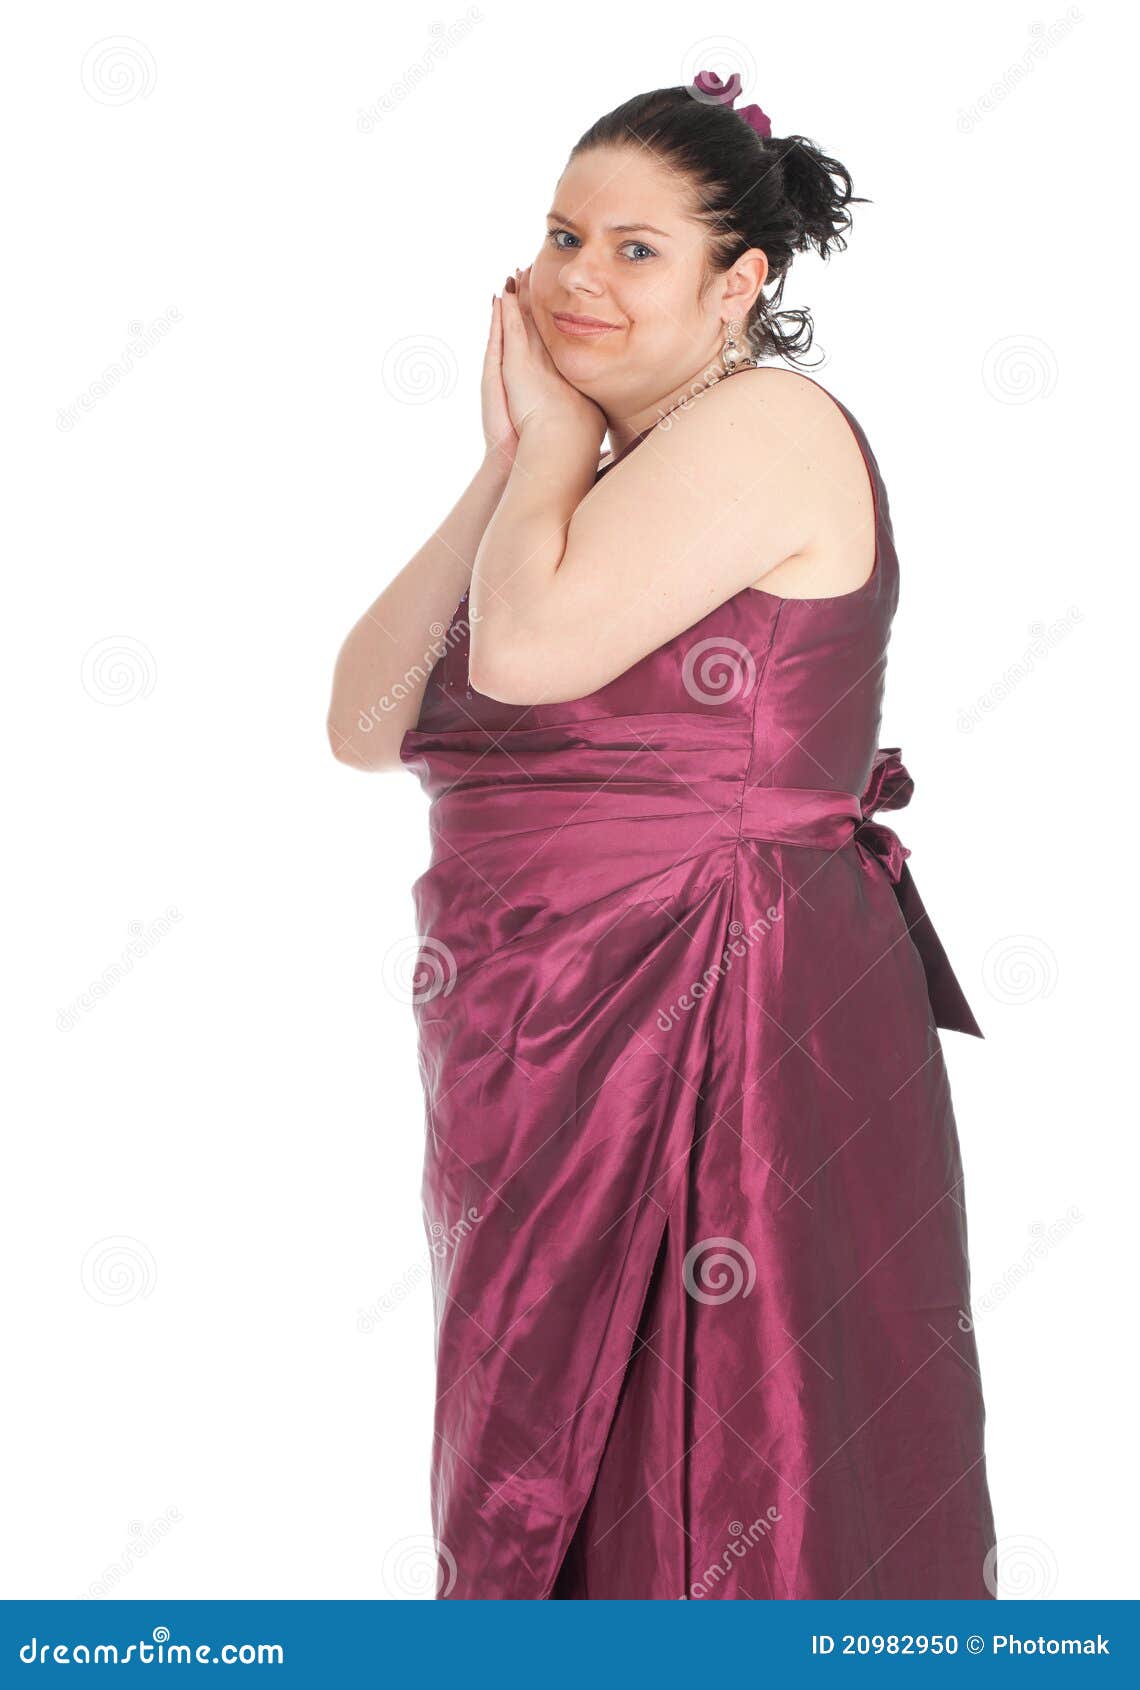 fat girl in gown